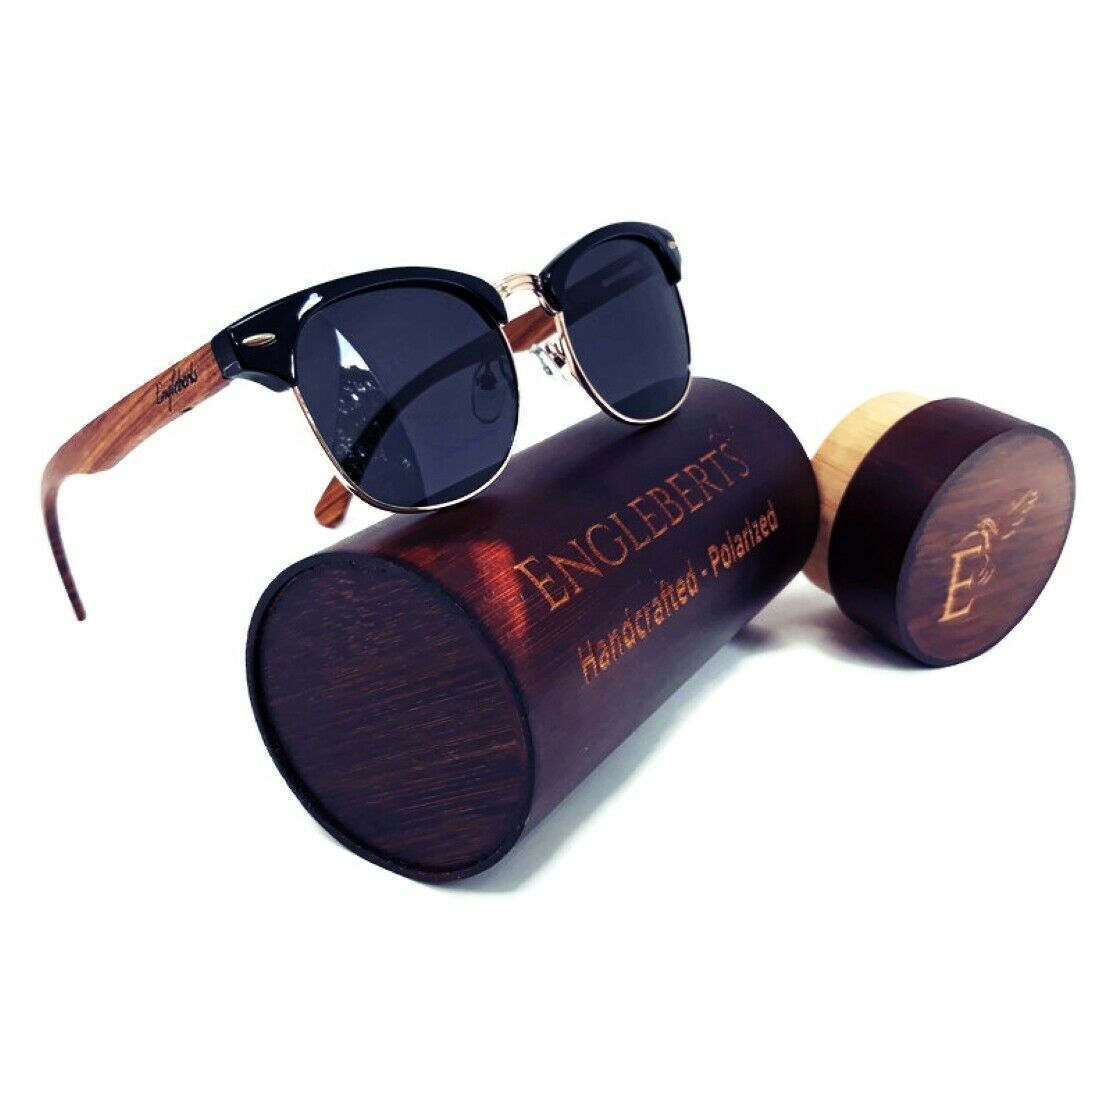 Handcrafted Walnut Wood Club Style Sunglasses With Bamboo Case, Polarized